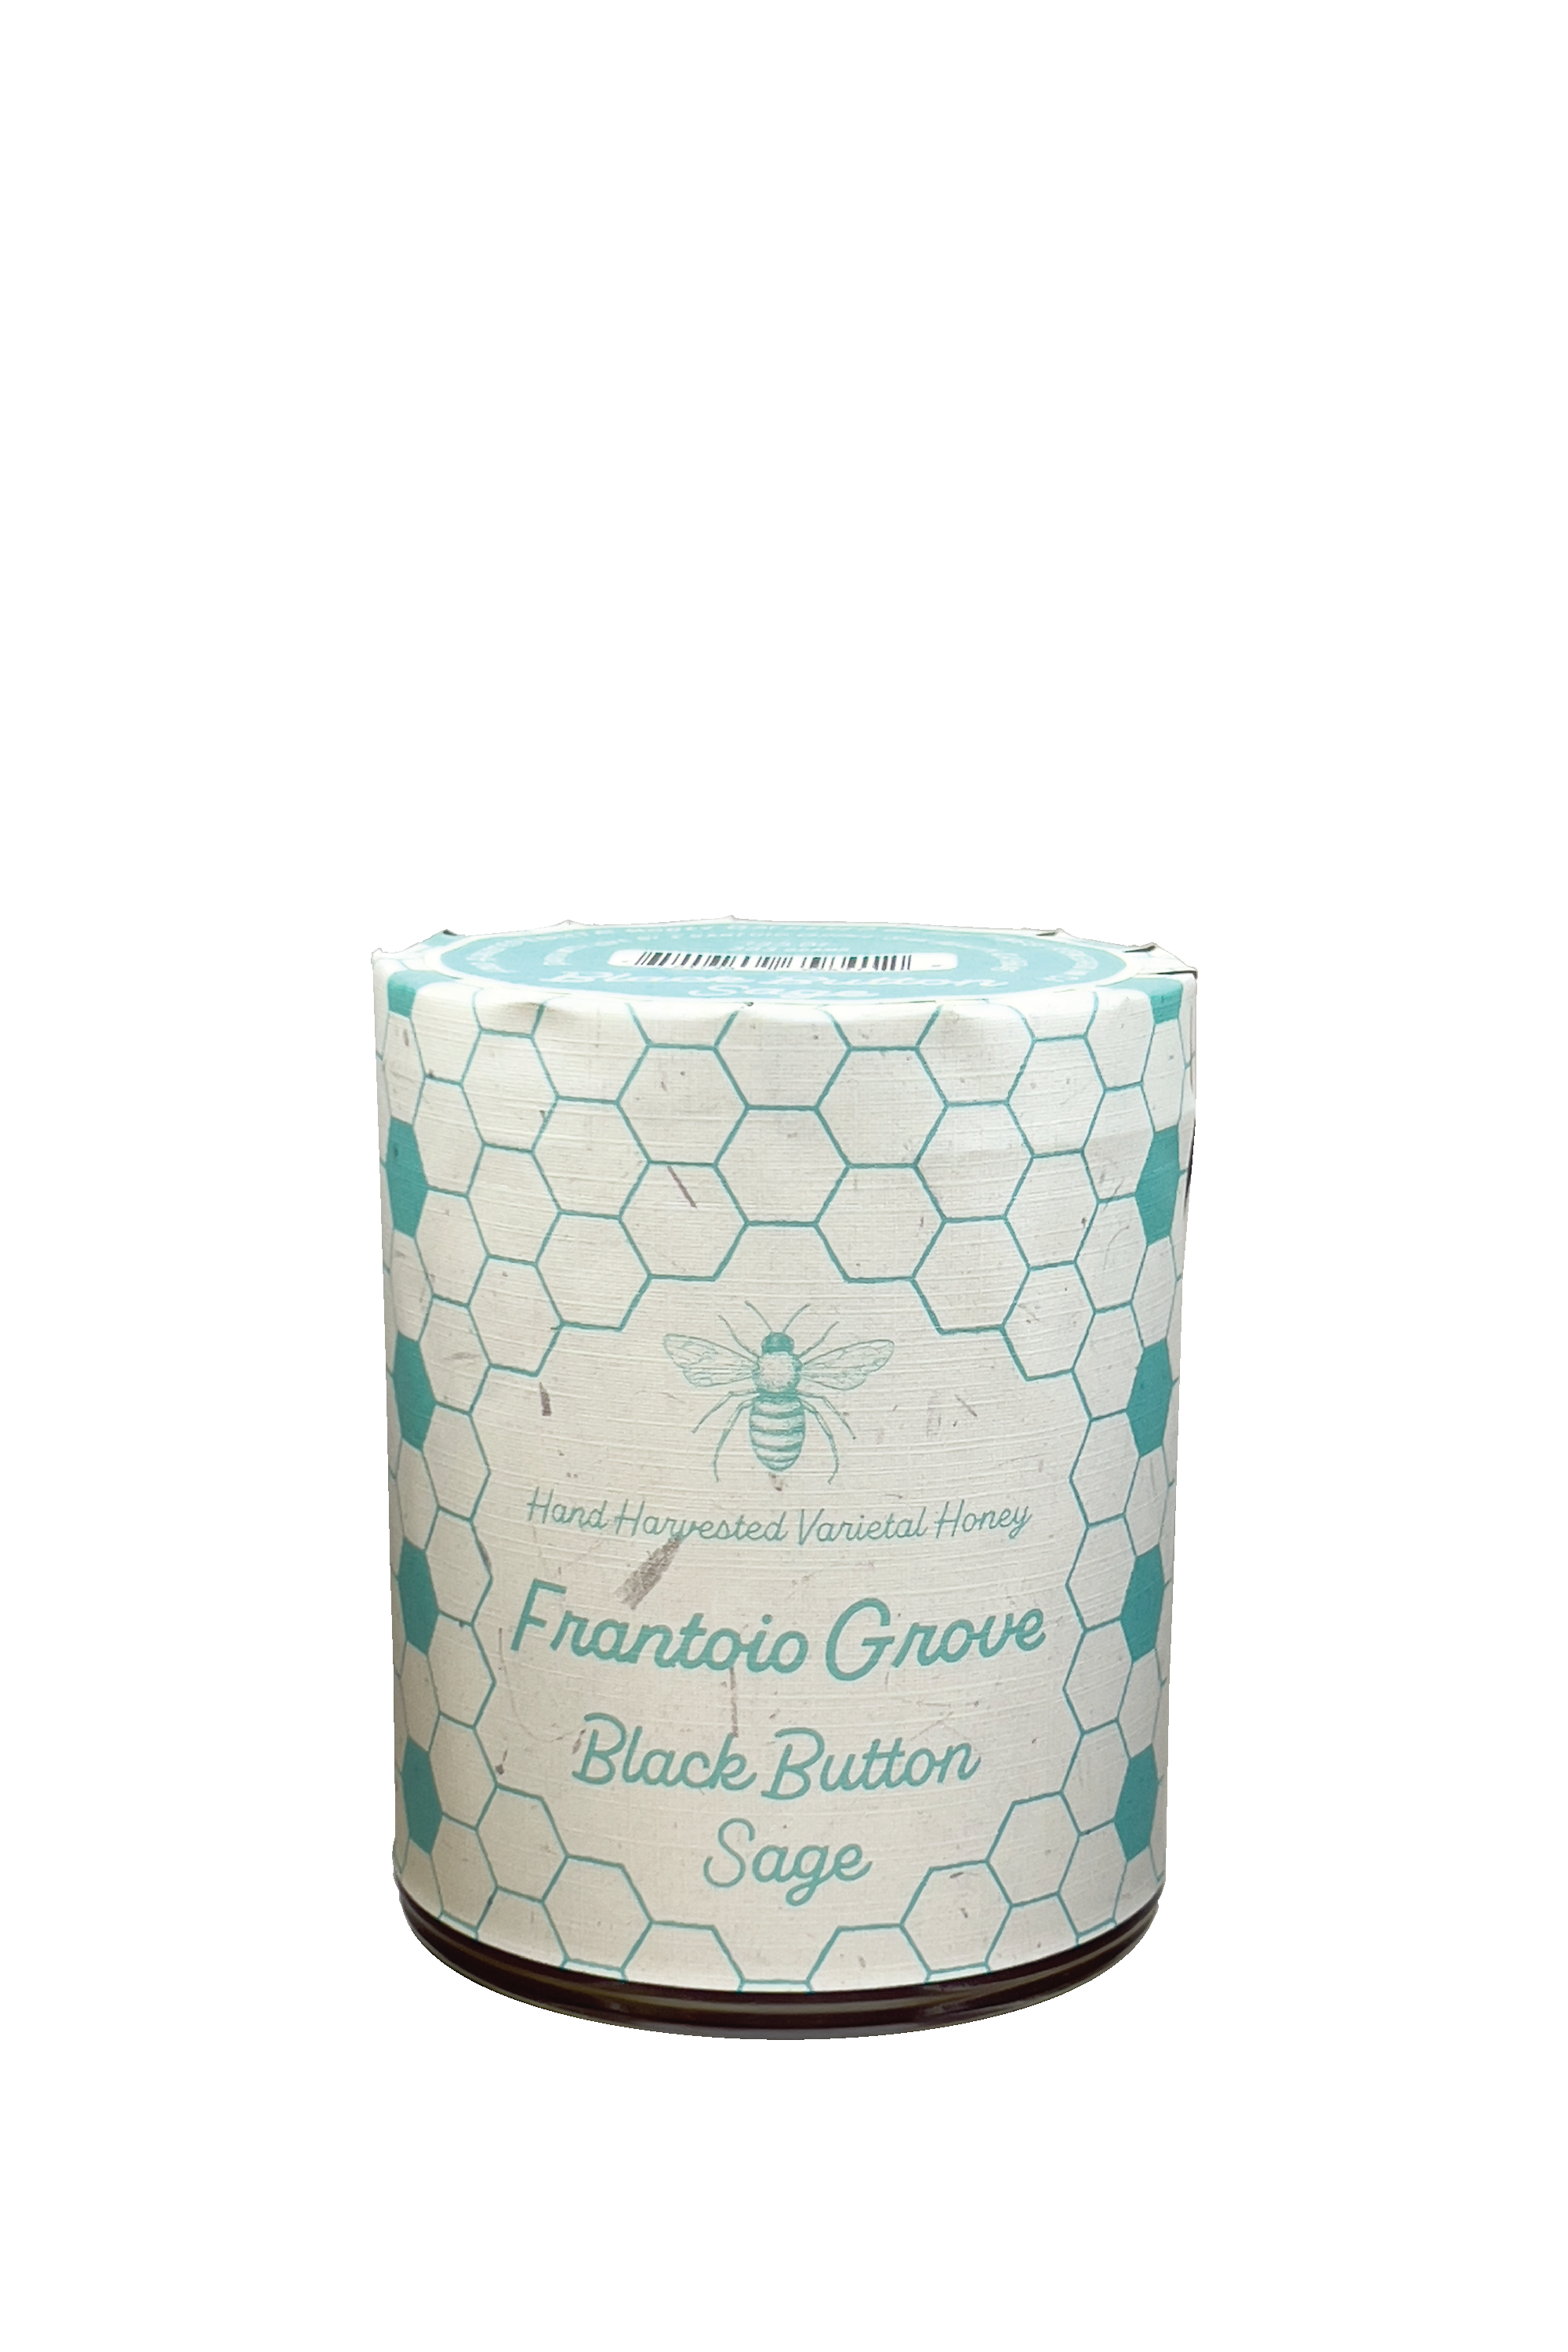 Image of a jar of Frantoio Grove's hand harvested Black Button Sage Honey on a White Background. Jar is wrapped in white paper with art depicting a bee and a pattern of alternating teal and white honeycomb.